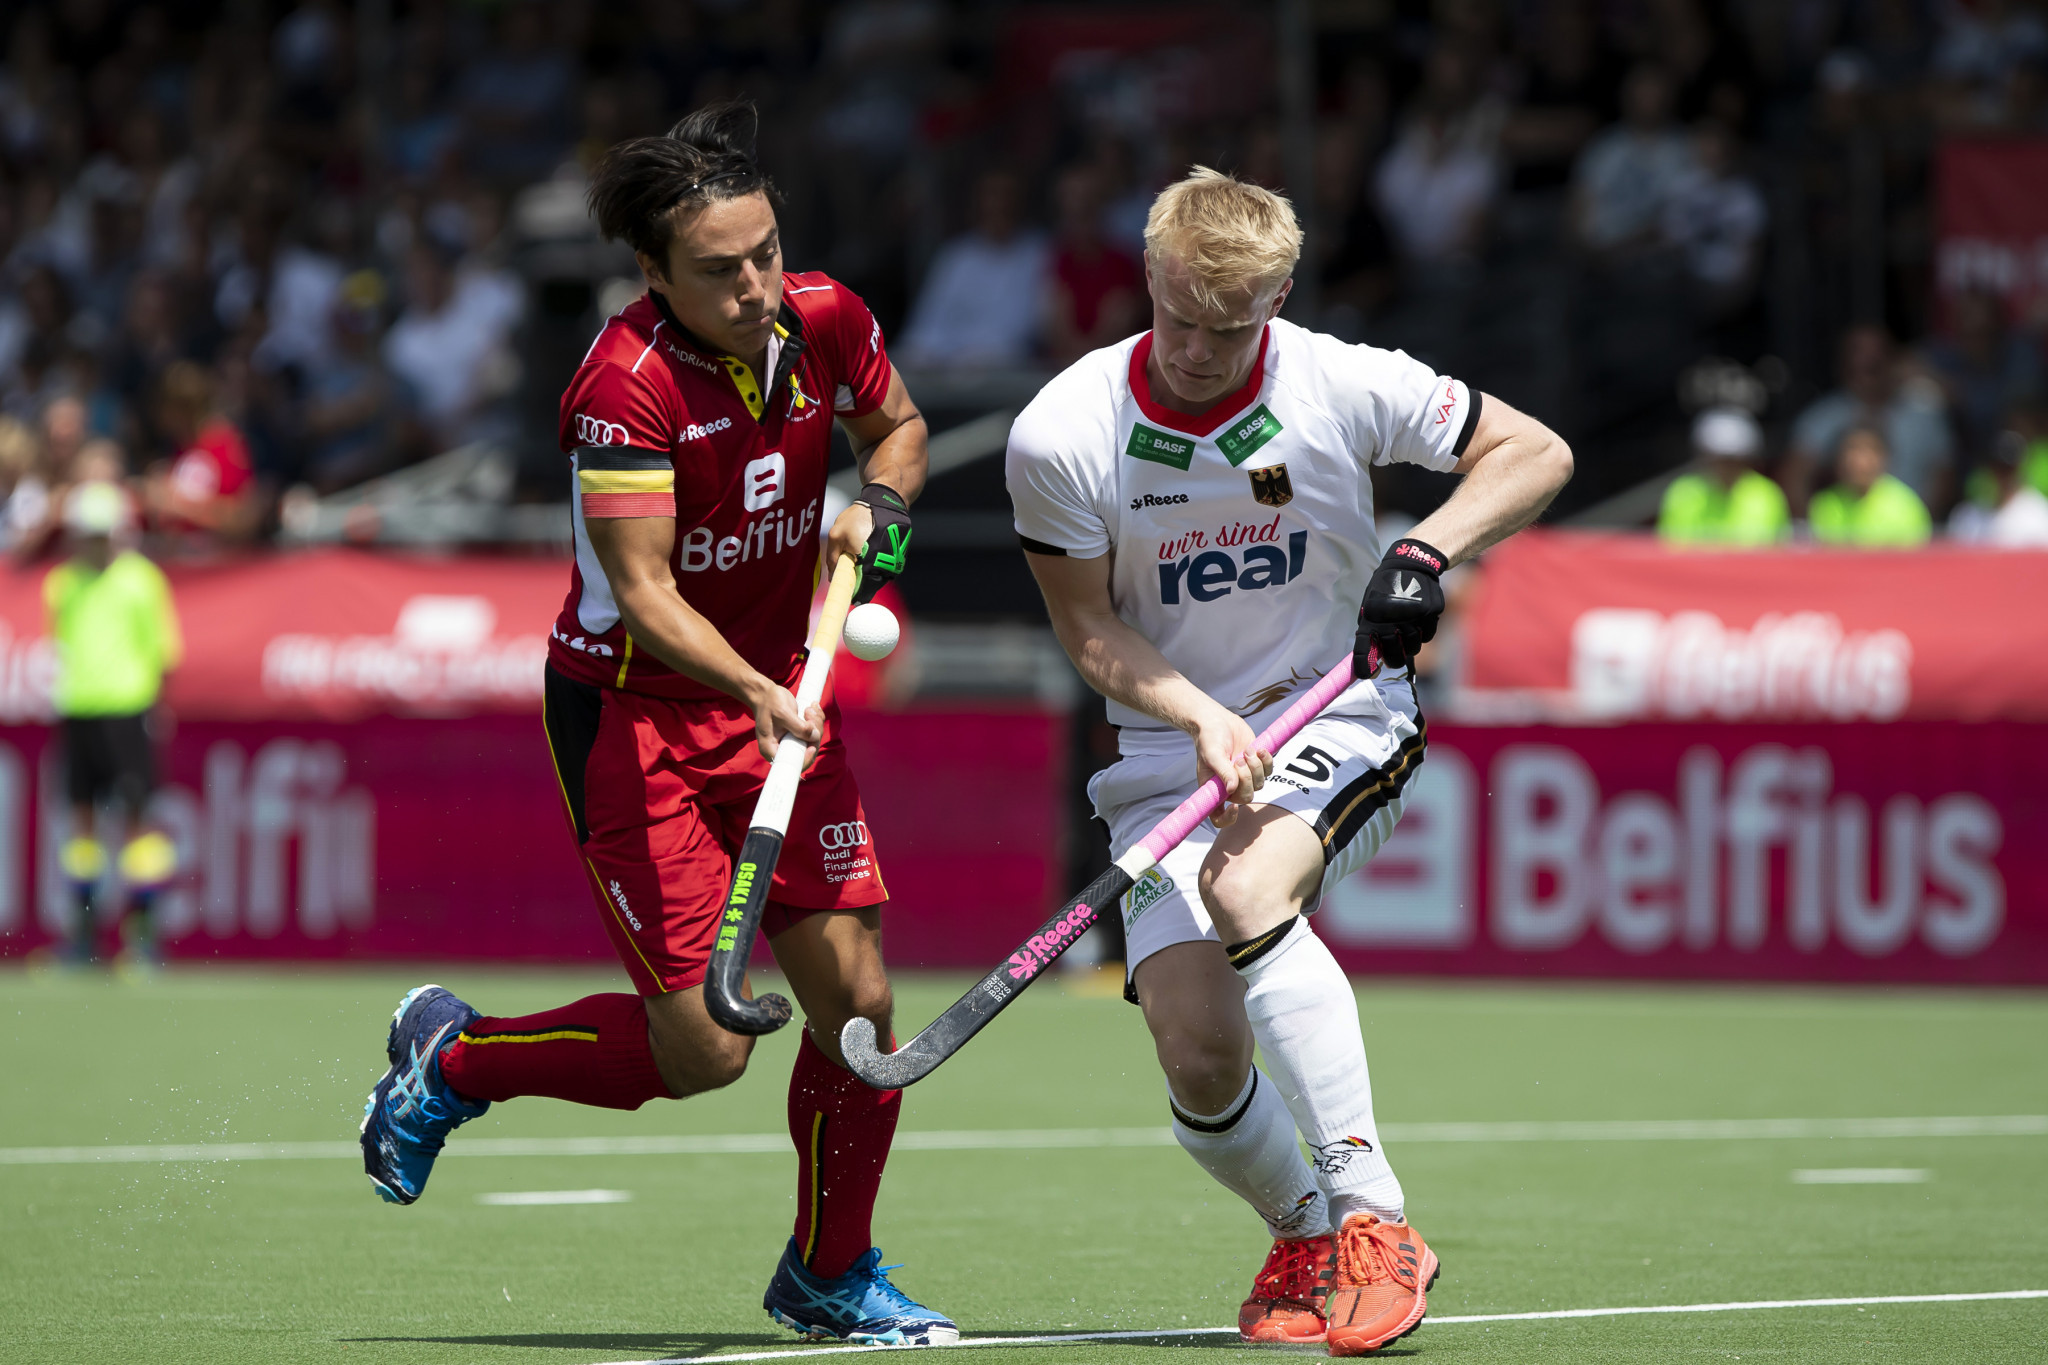 Live matches from the FIH Hockey Pro League will be available to watch ©Getty Images